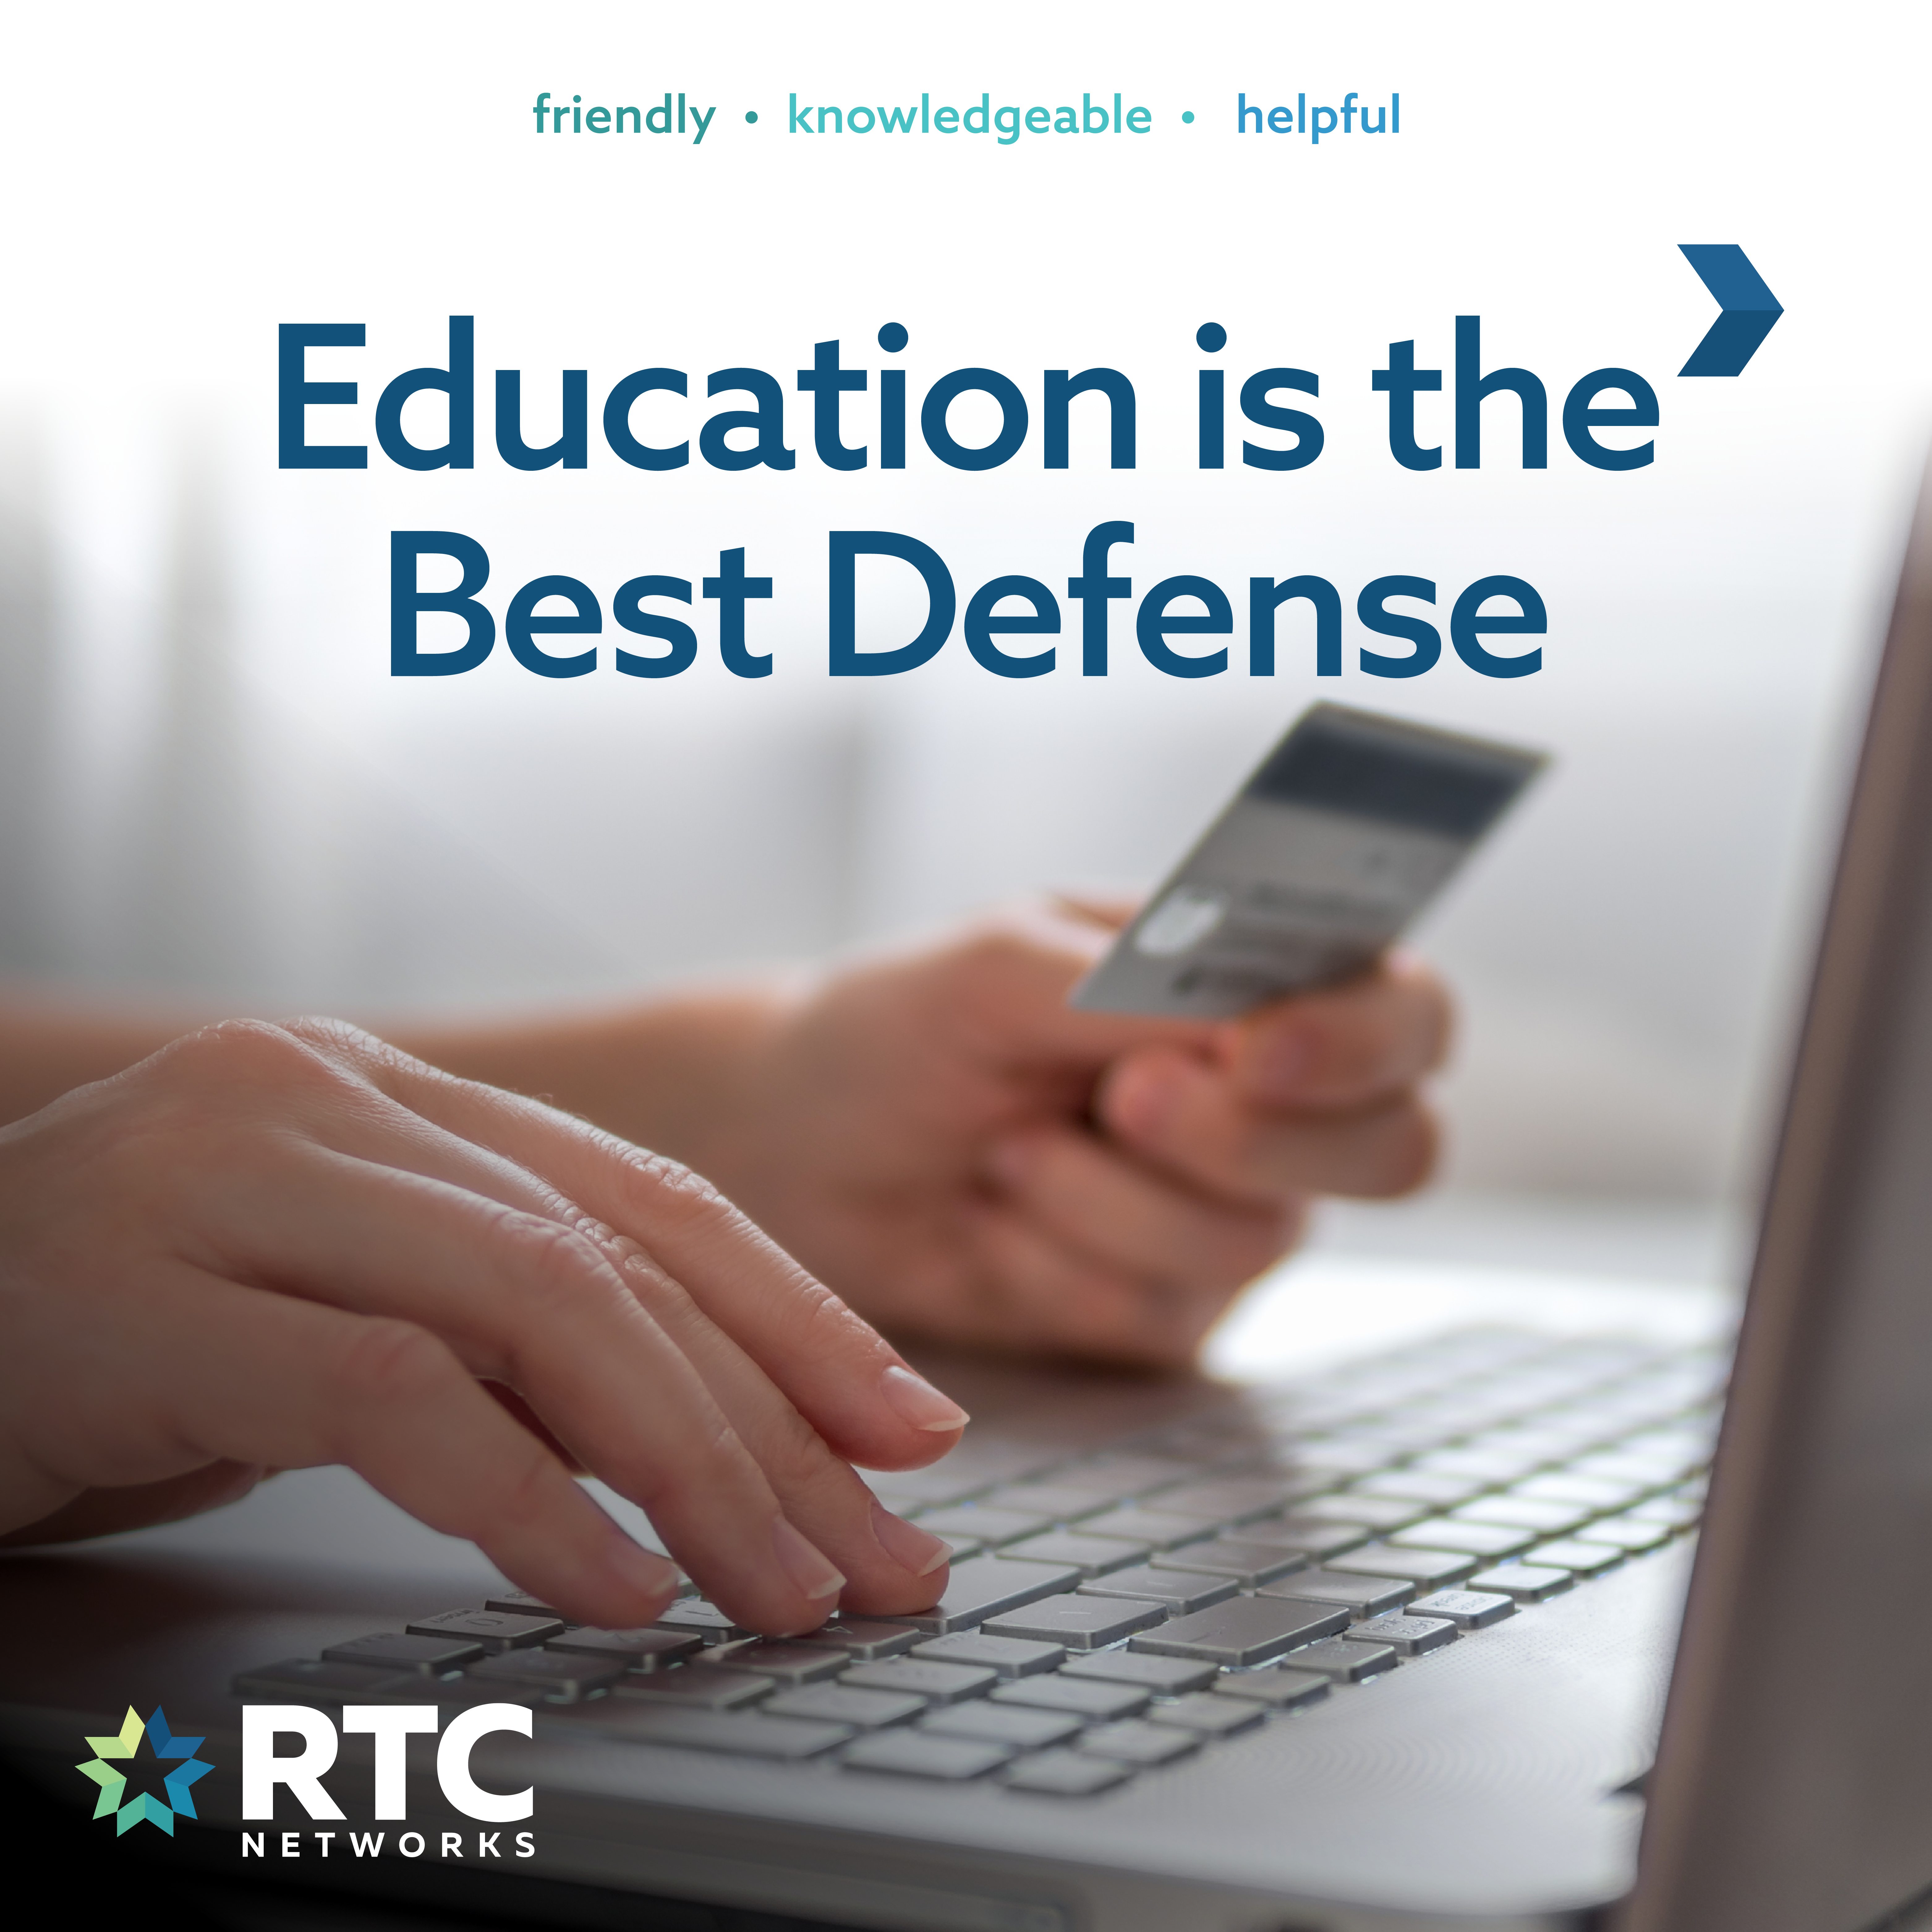 Education is the Best Defense